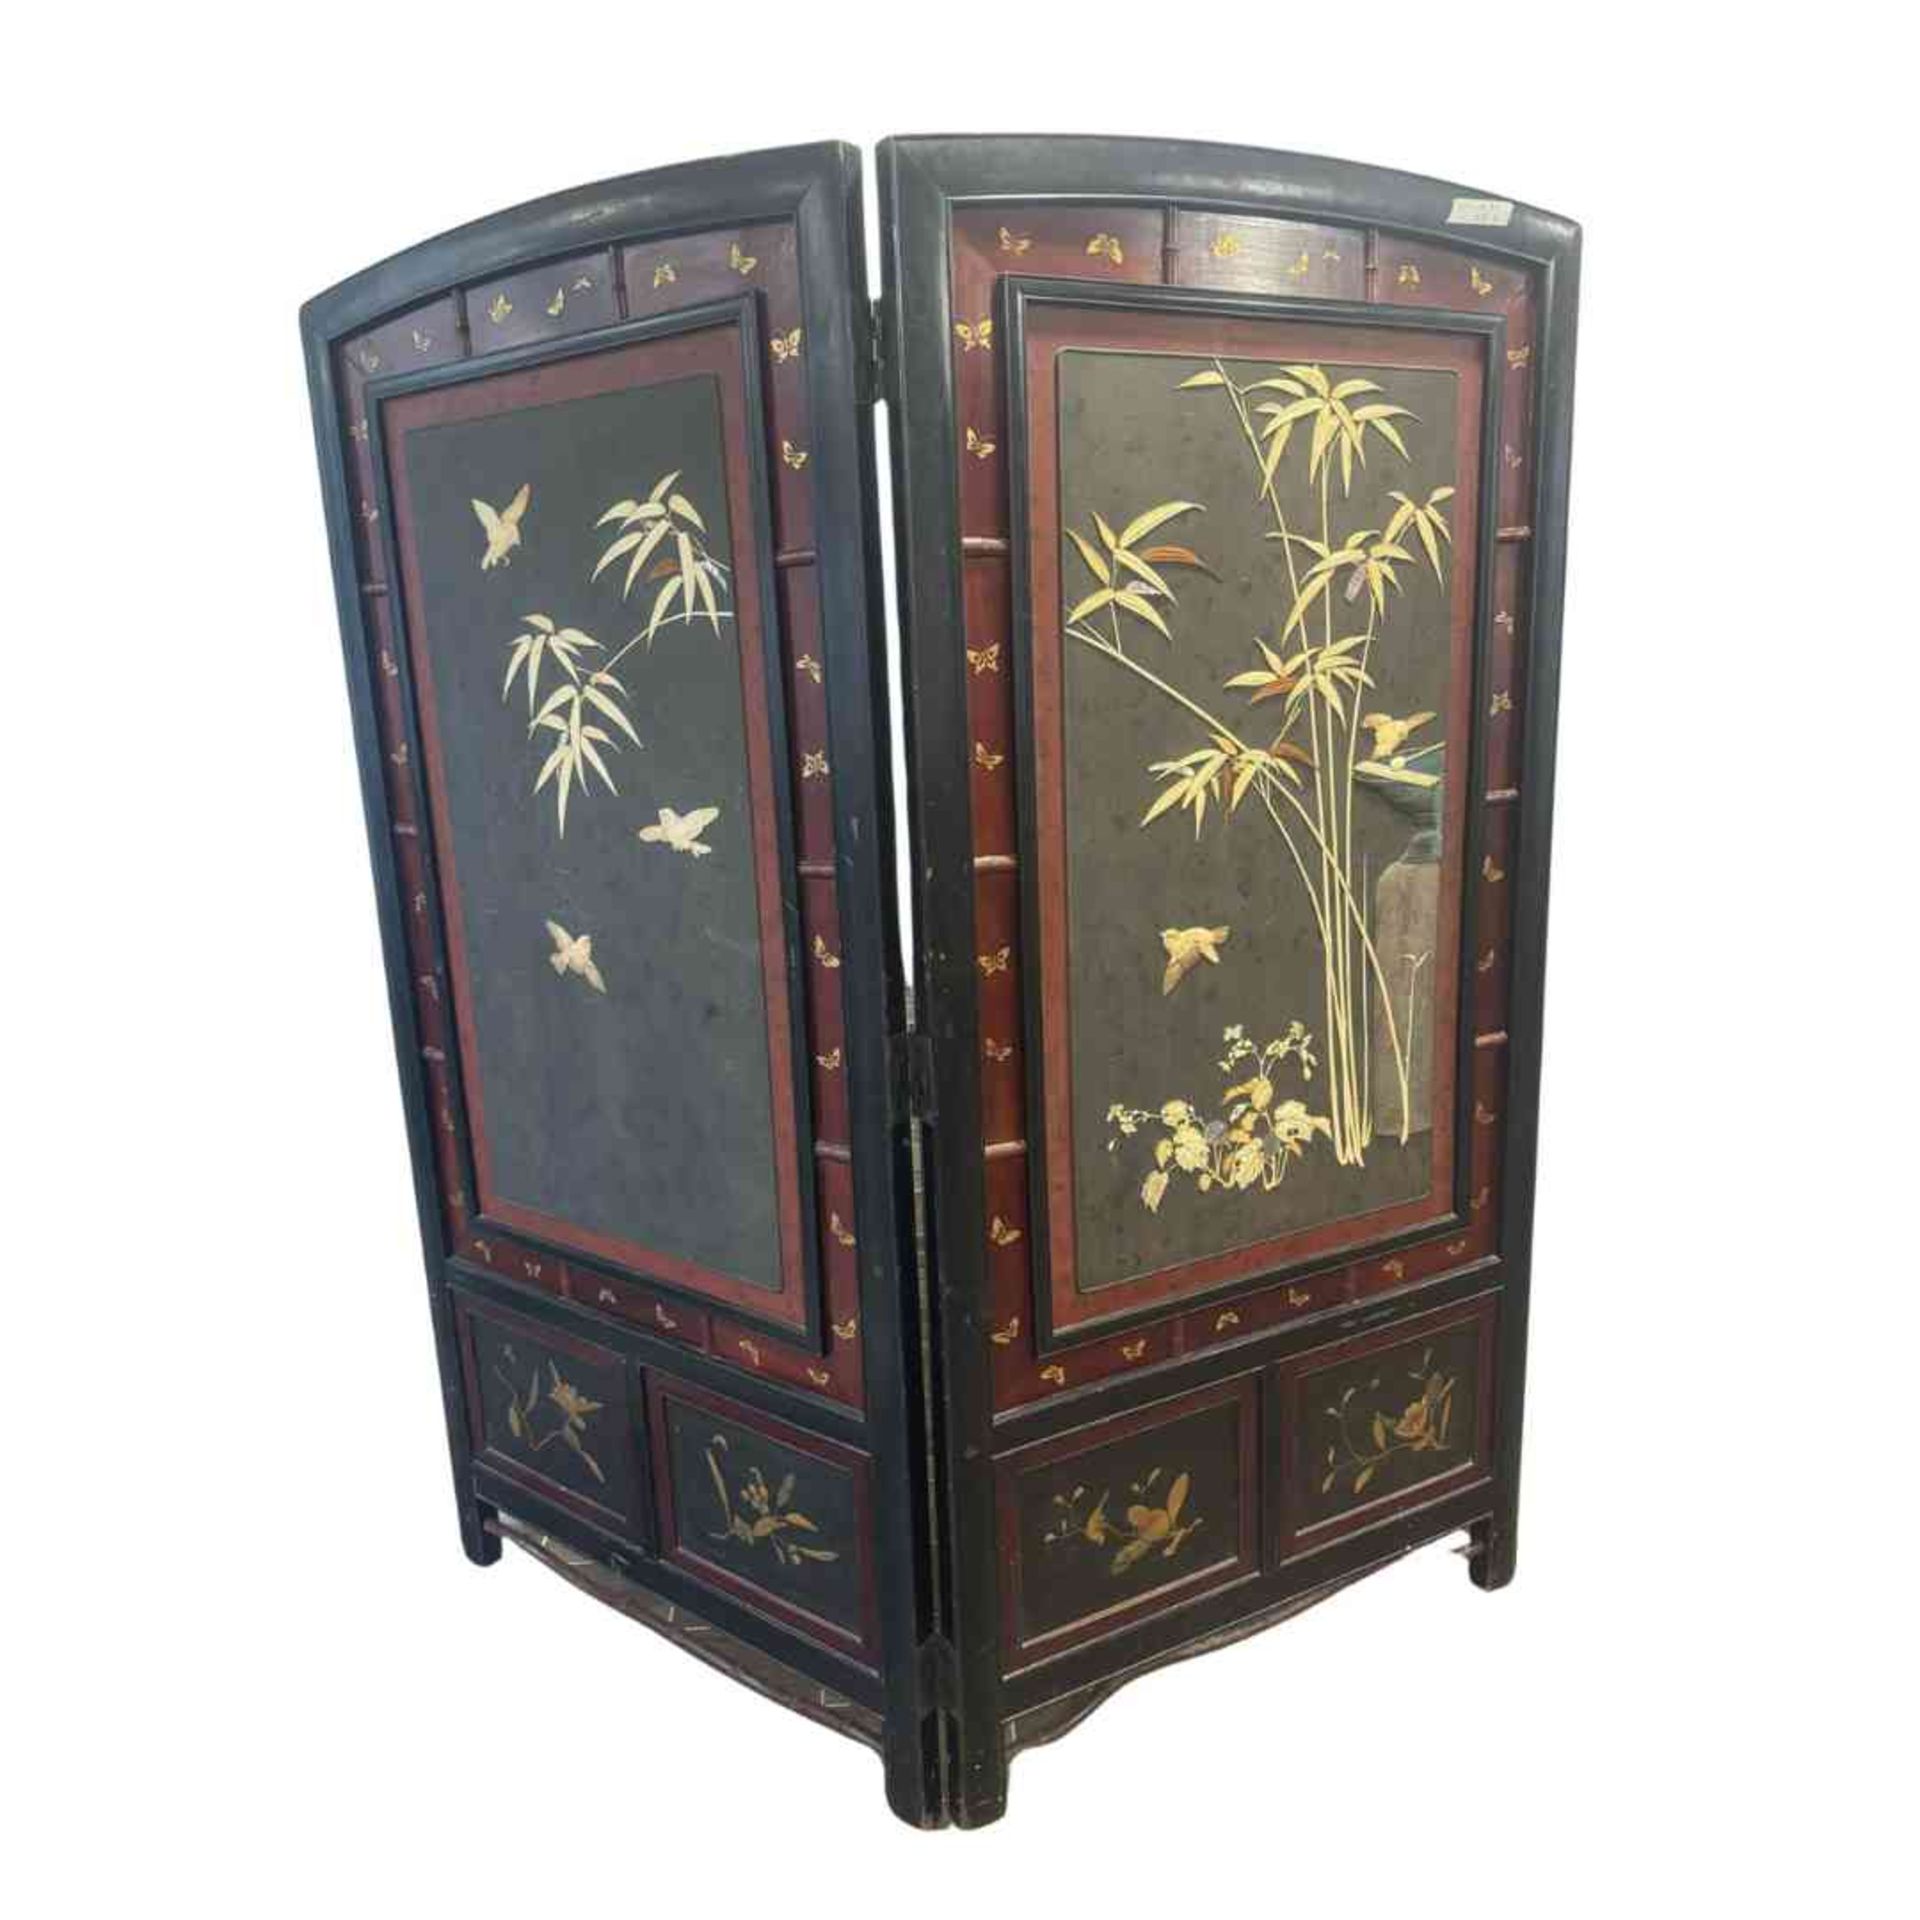 Double-wing lacquered wooden screen - Image 2 of 23